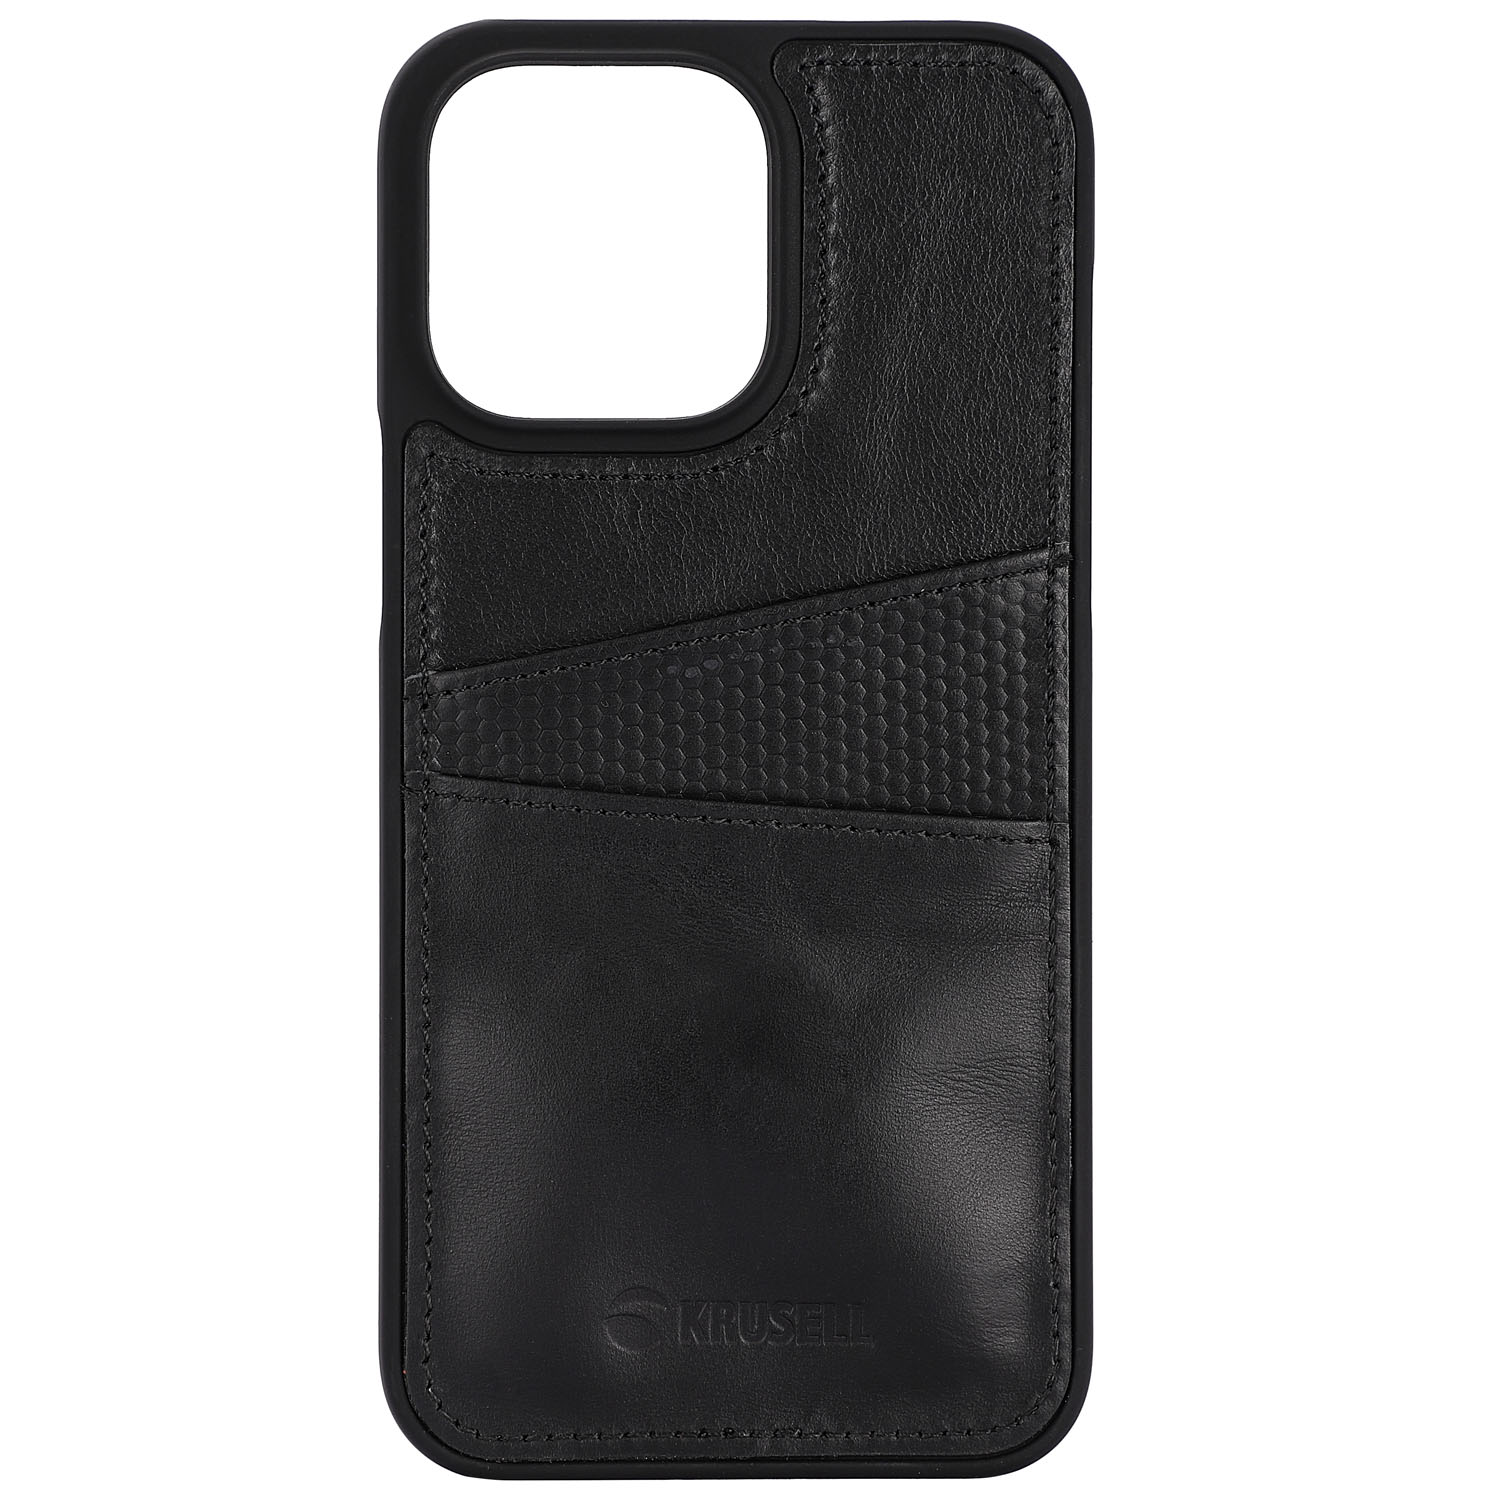 KRUSELL Leder 14 Pro iPhone Schwarz Pro Schwarz, Apple, 14 Max iPhone Backcover, Max, CardCover